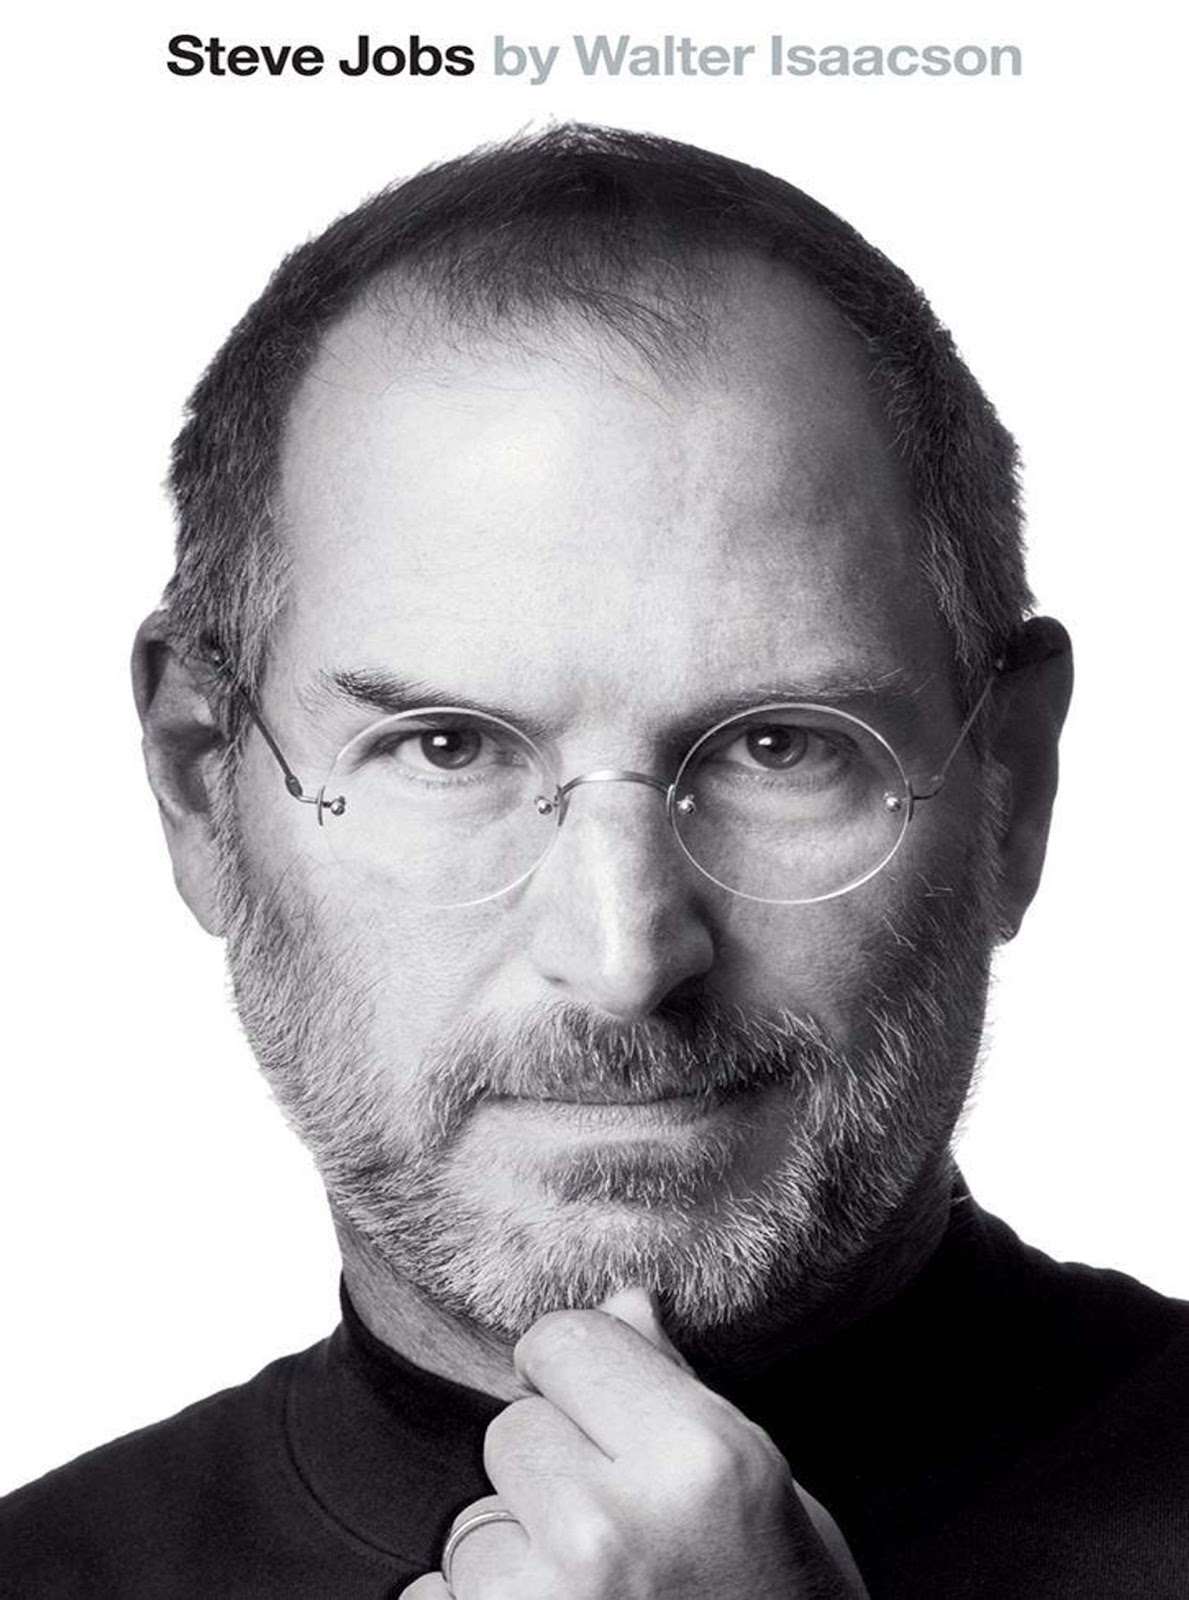 steve jobs by walter isaacson pdf free download